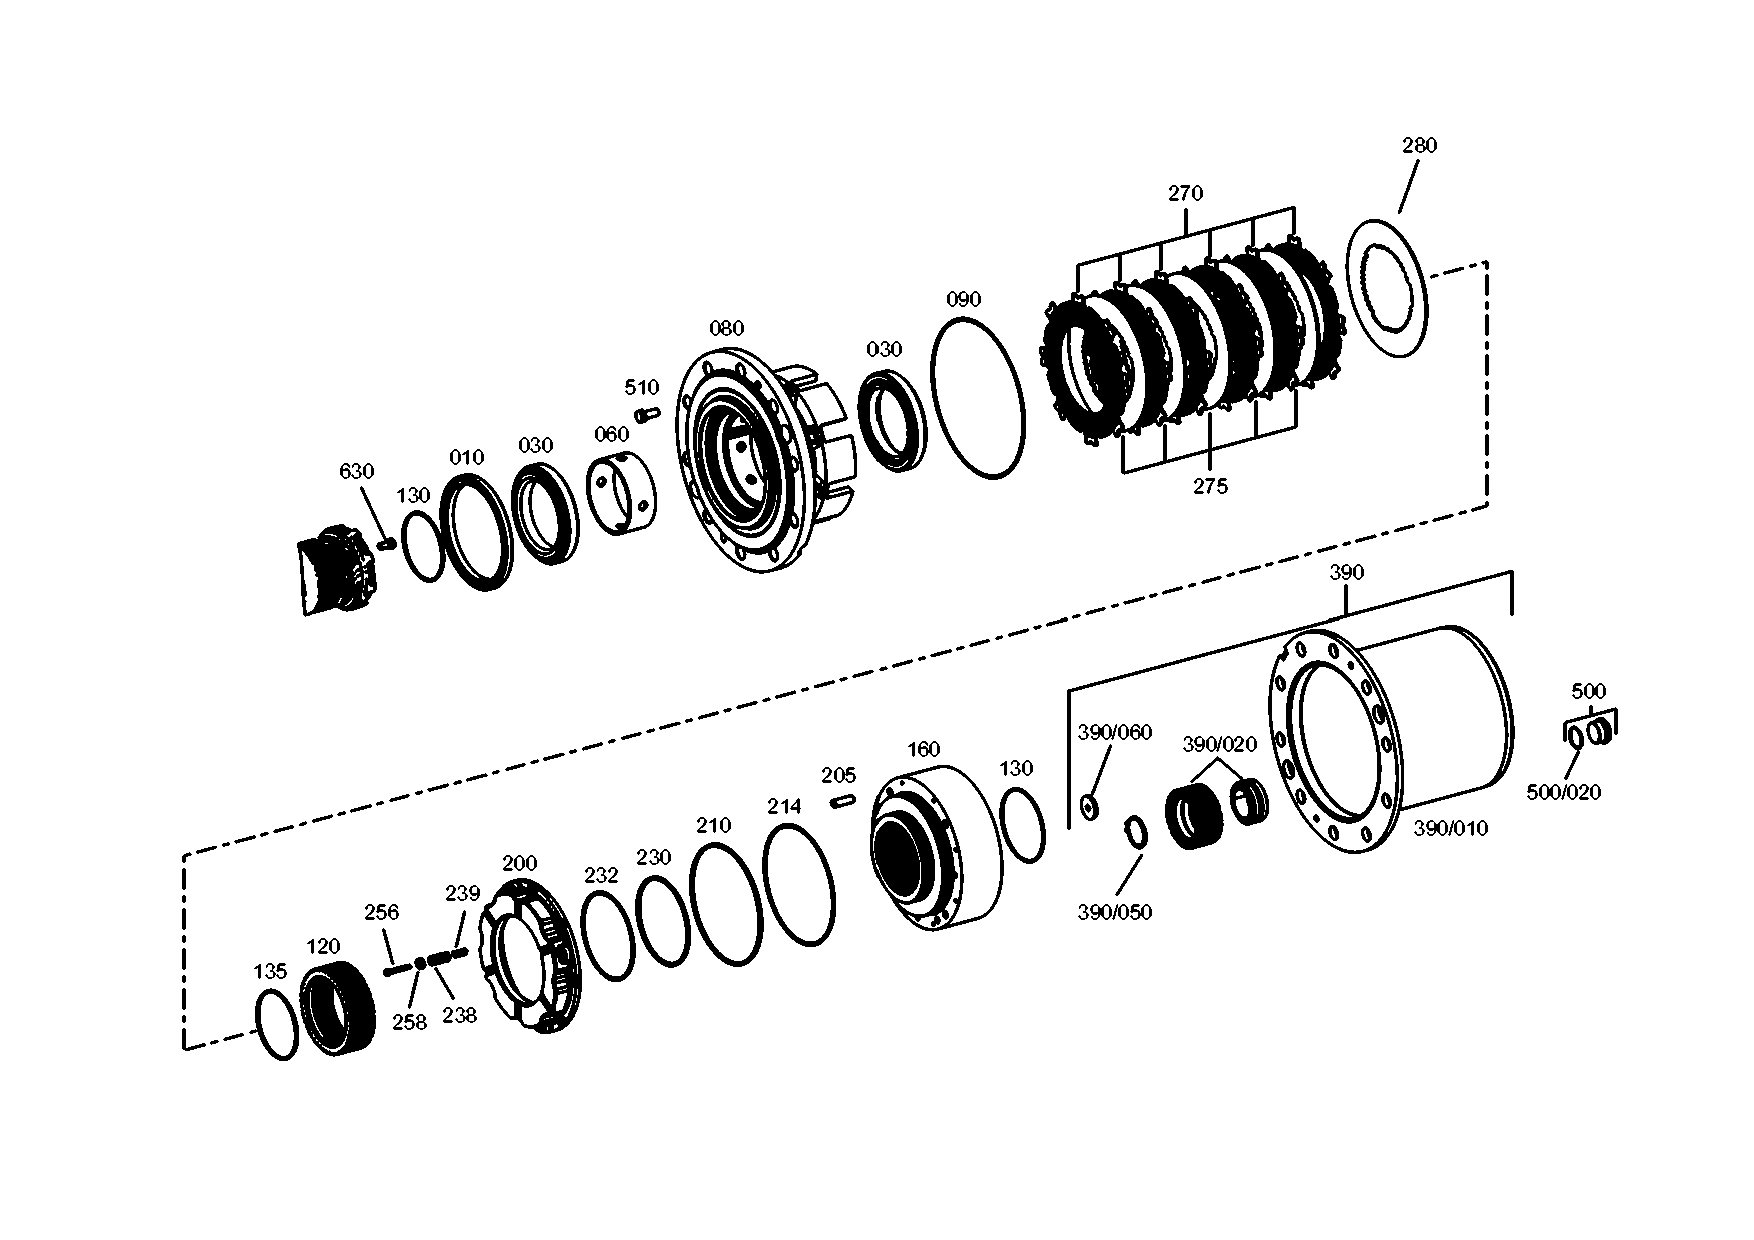 drawing for VOITH-GETRIEBE KG 01.0545.30 - O-RING (figure 4)